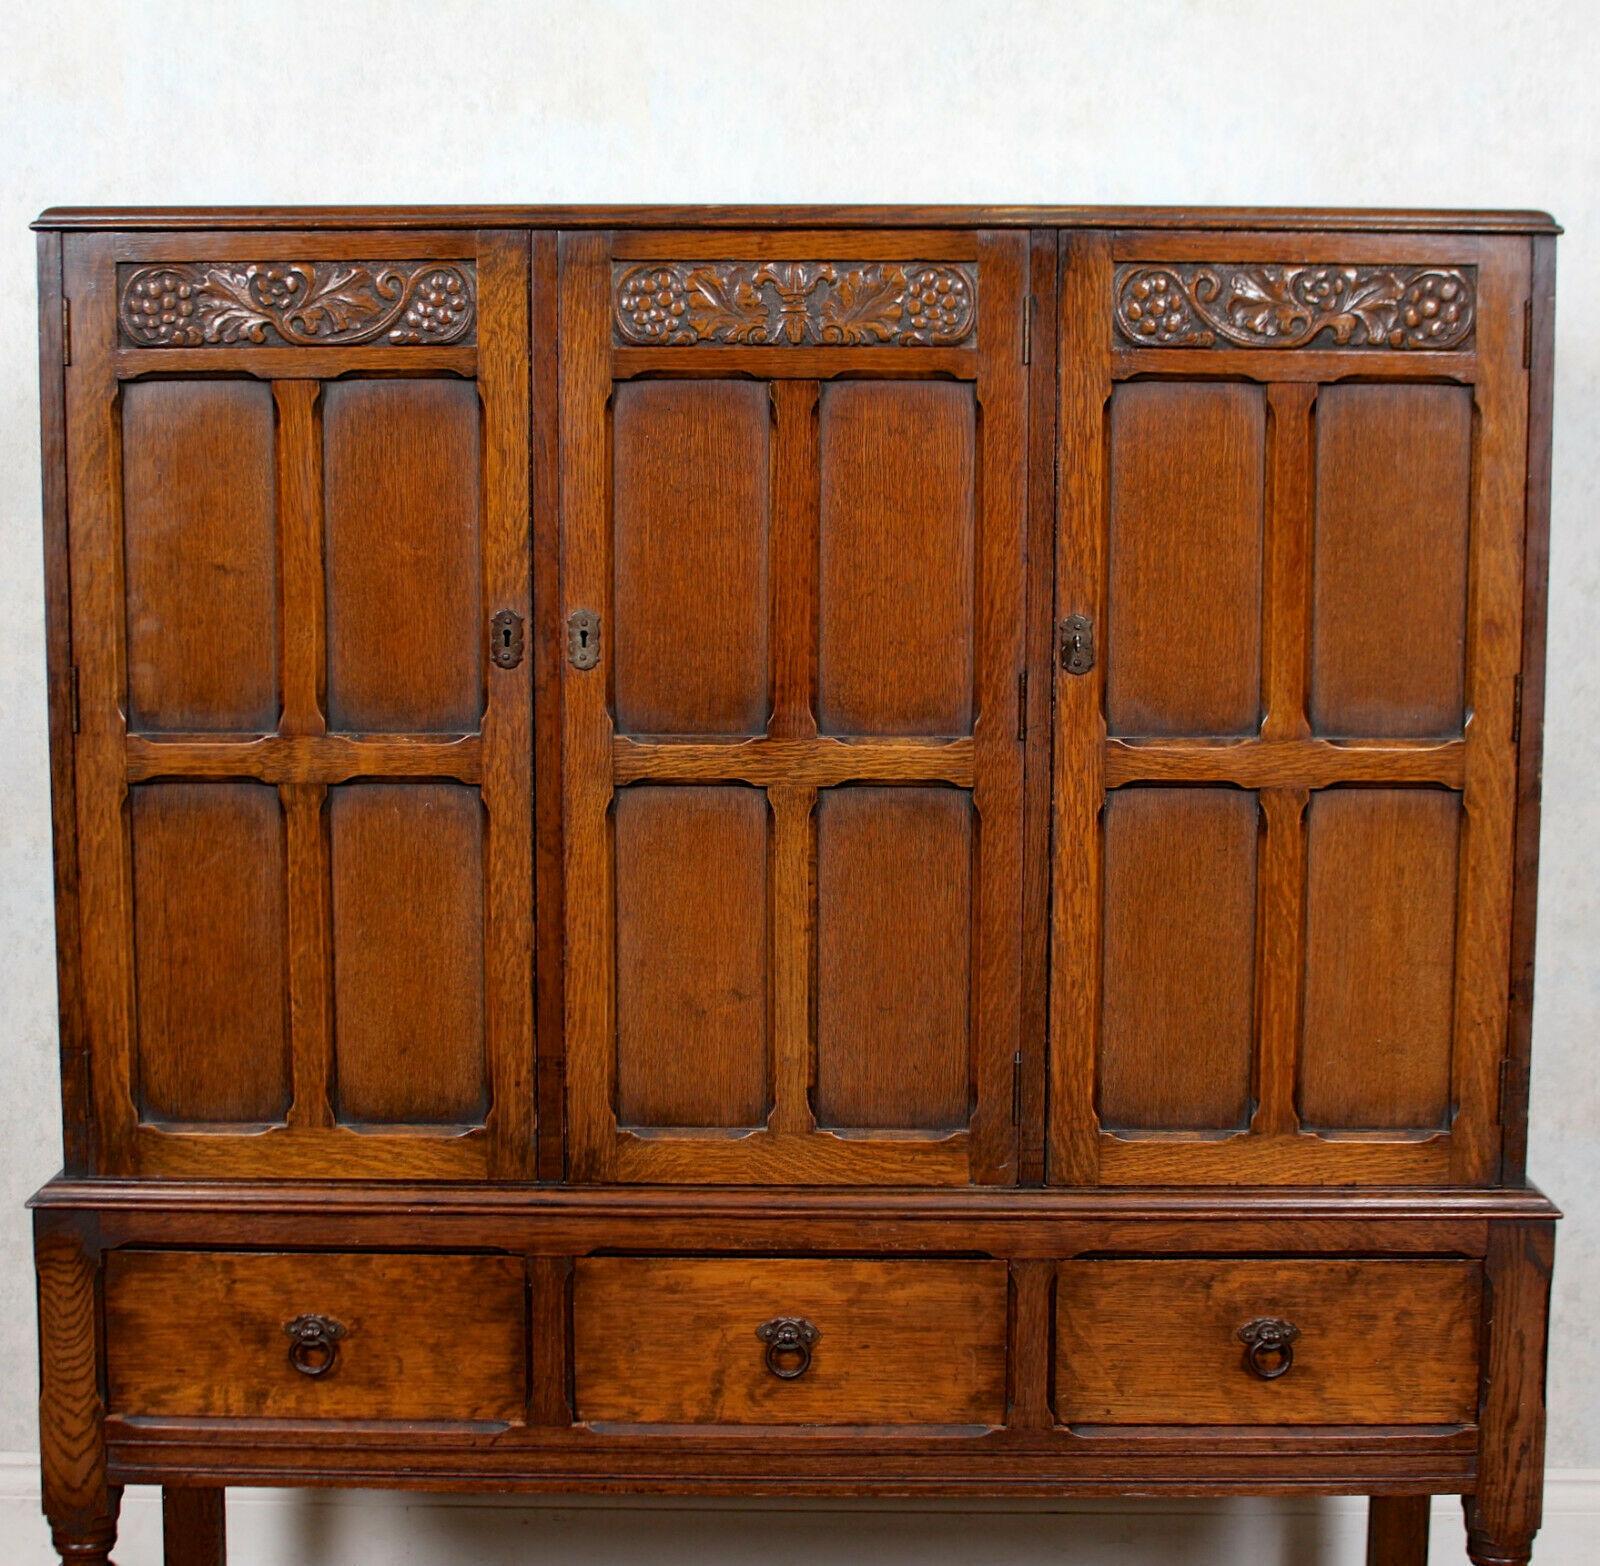 A fine quality carved oak cabinet.
Constructed from thick cuts of solid oak boasting a well figured grain and rich patina.
Three panelled doors bearing a carved leaf and berry design enclosed shelving above three short drawers raised on bulbous